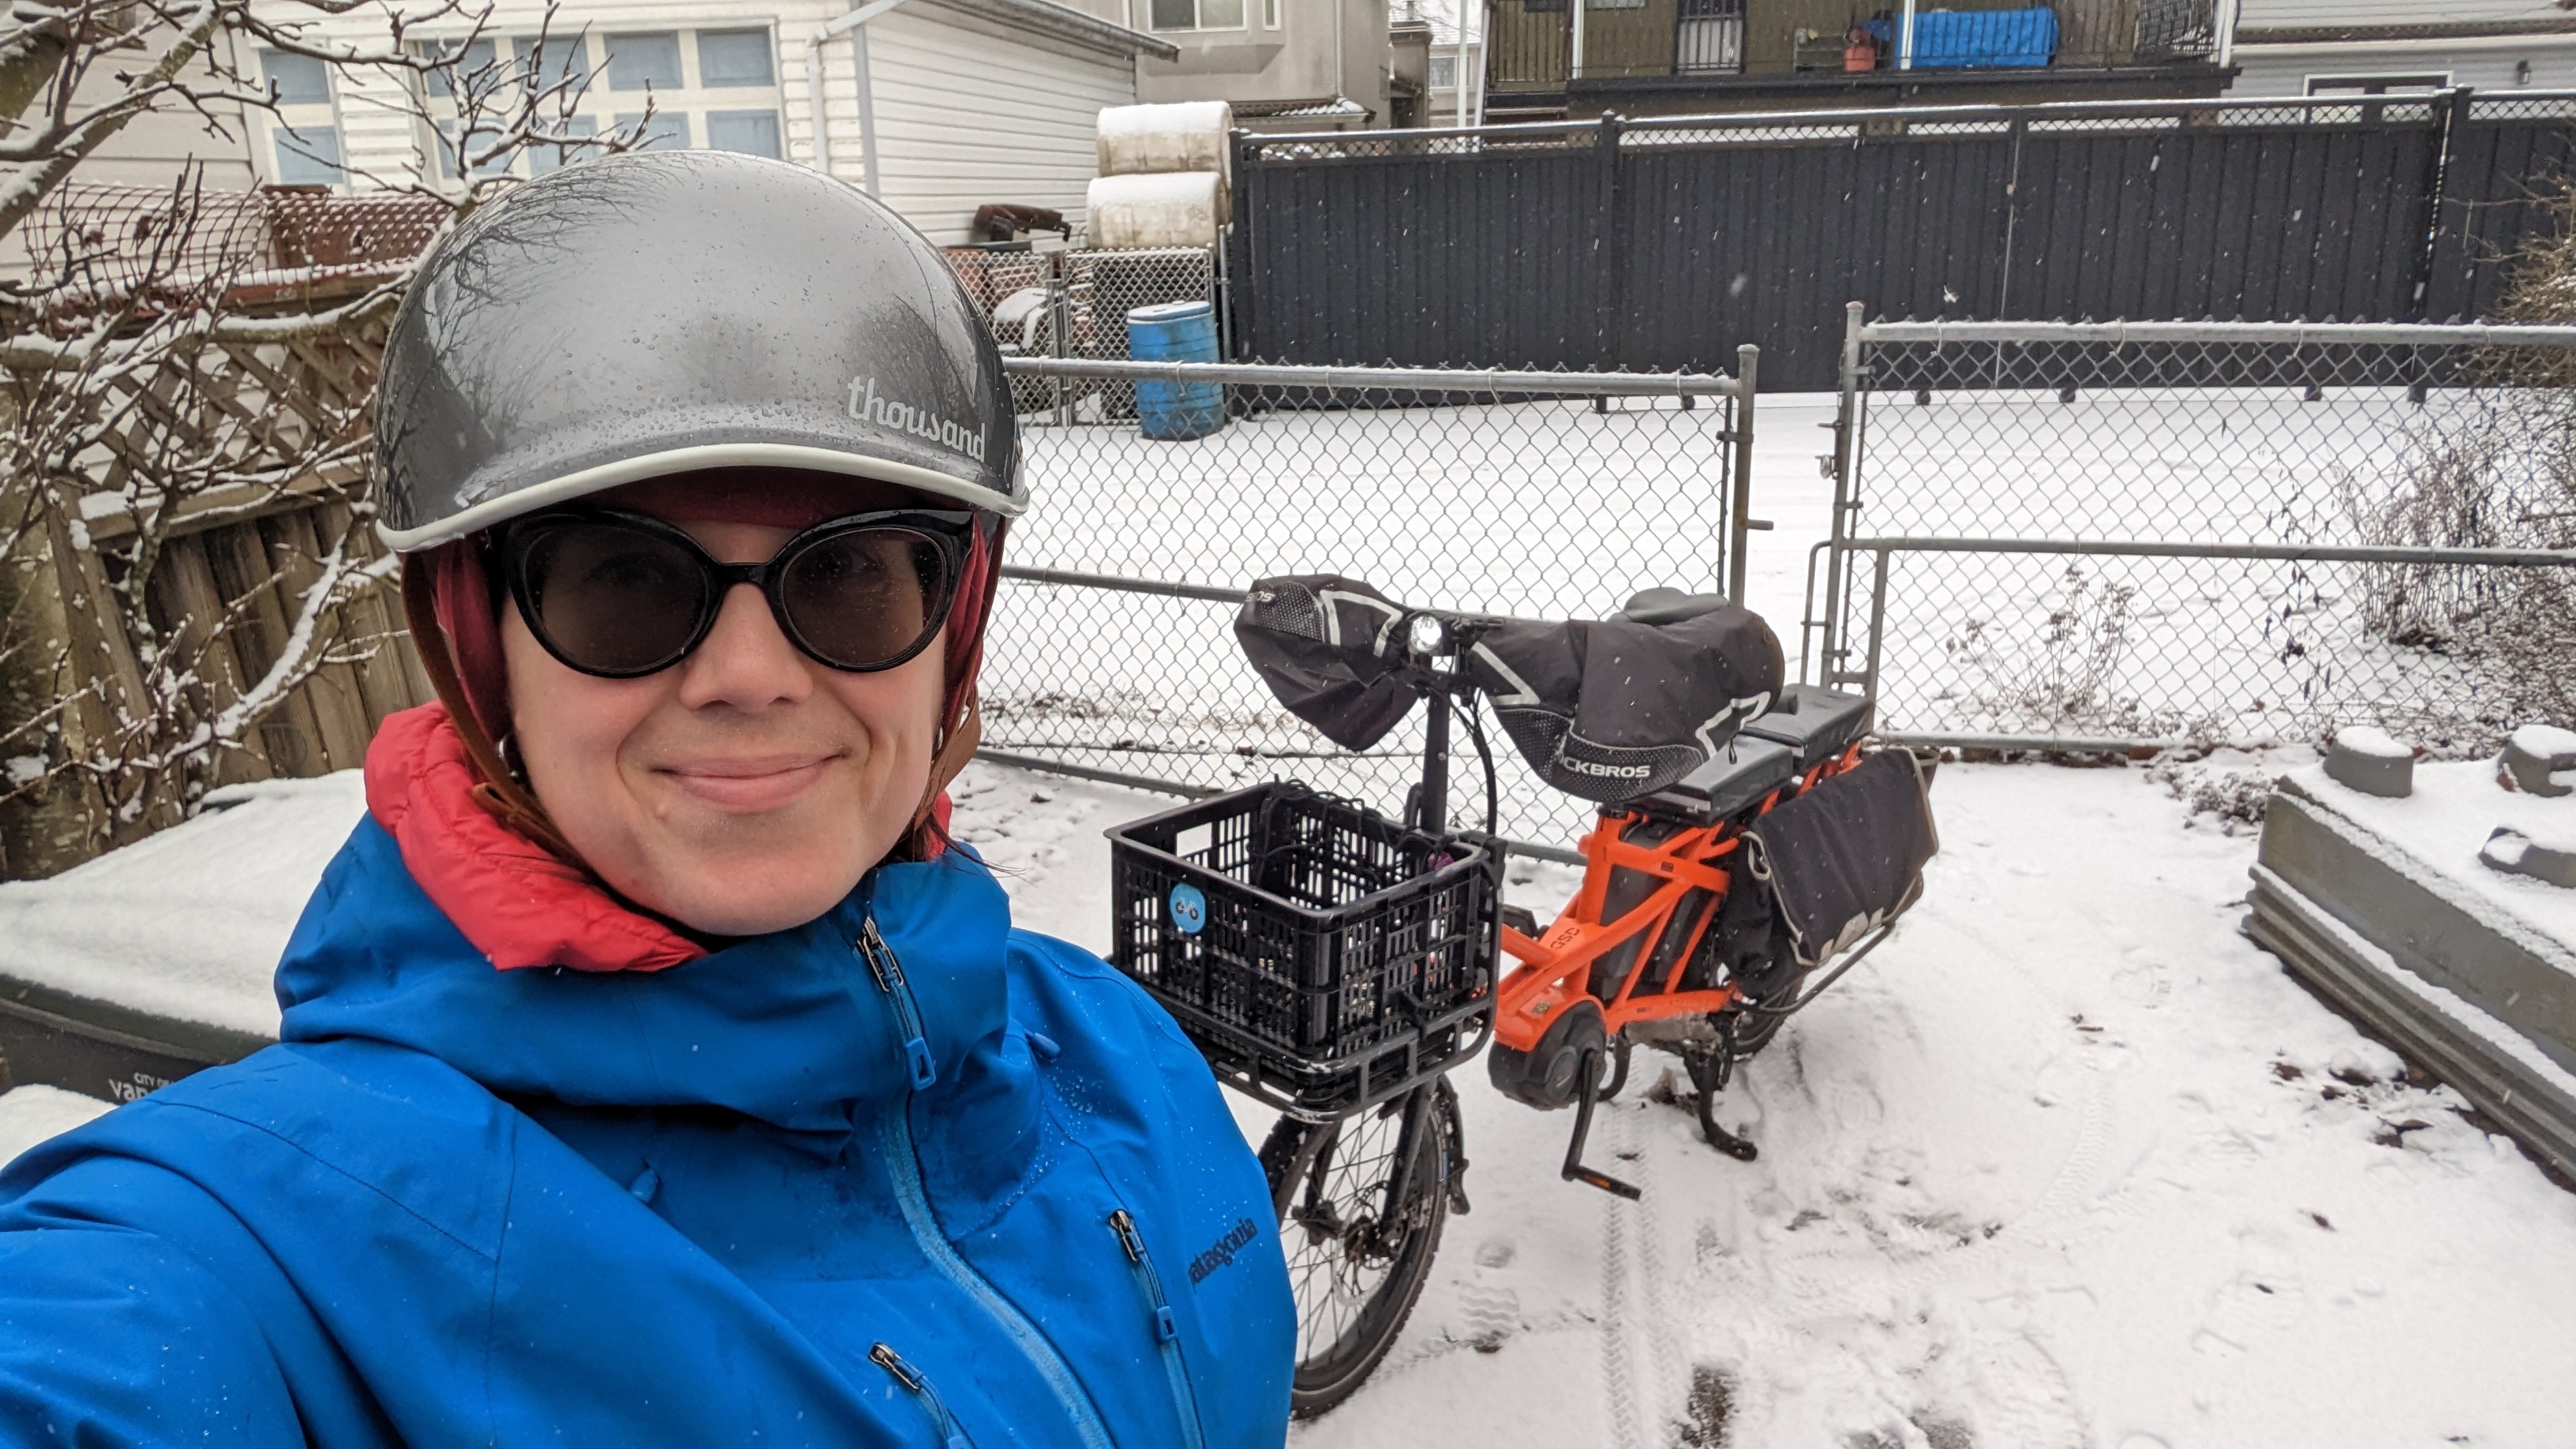 Lisa Corriveau takes a selfie with her electric cargo bike. The ground is covered in snow. She wears a gray helmet, sunglasses, and a blue rain jacket.